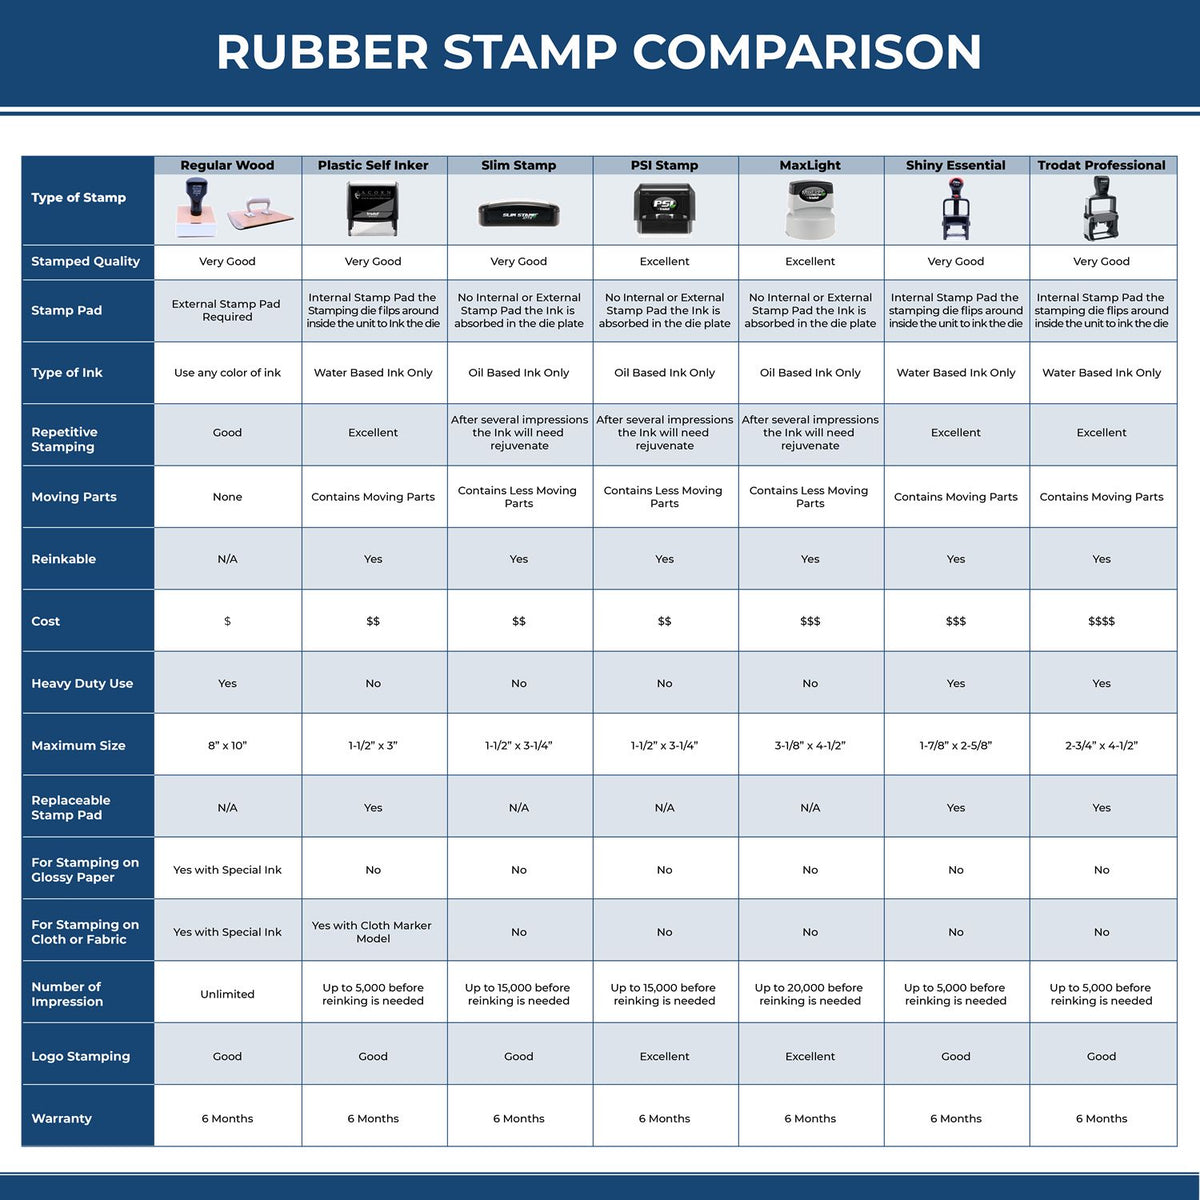 Large Self-Inking Bold Recibido Stamp 5541S Rubber Stamp Comparison